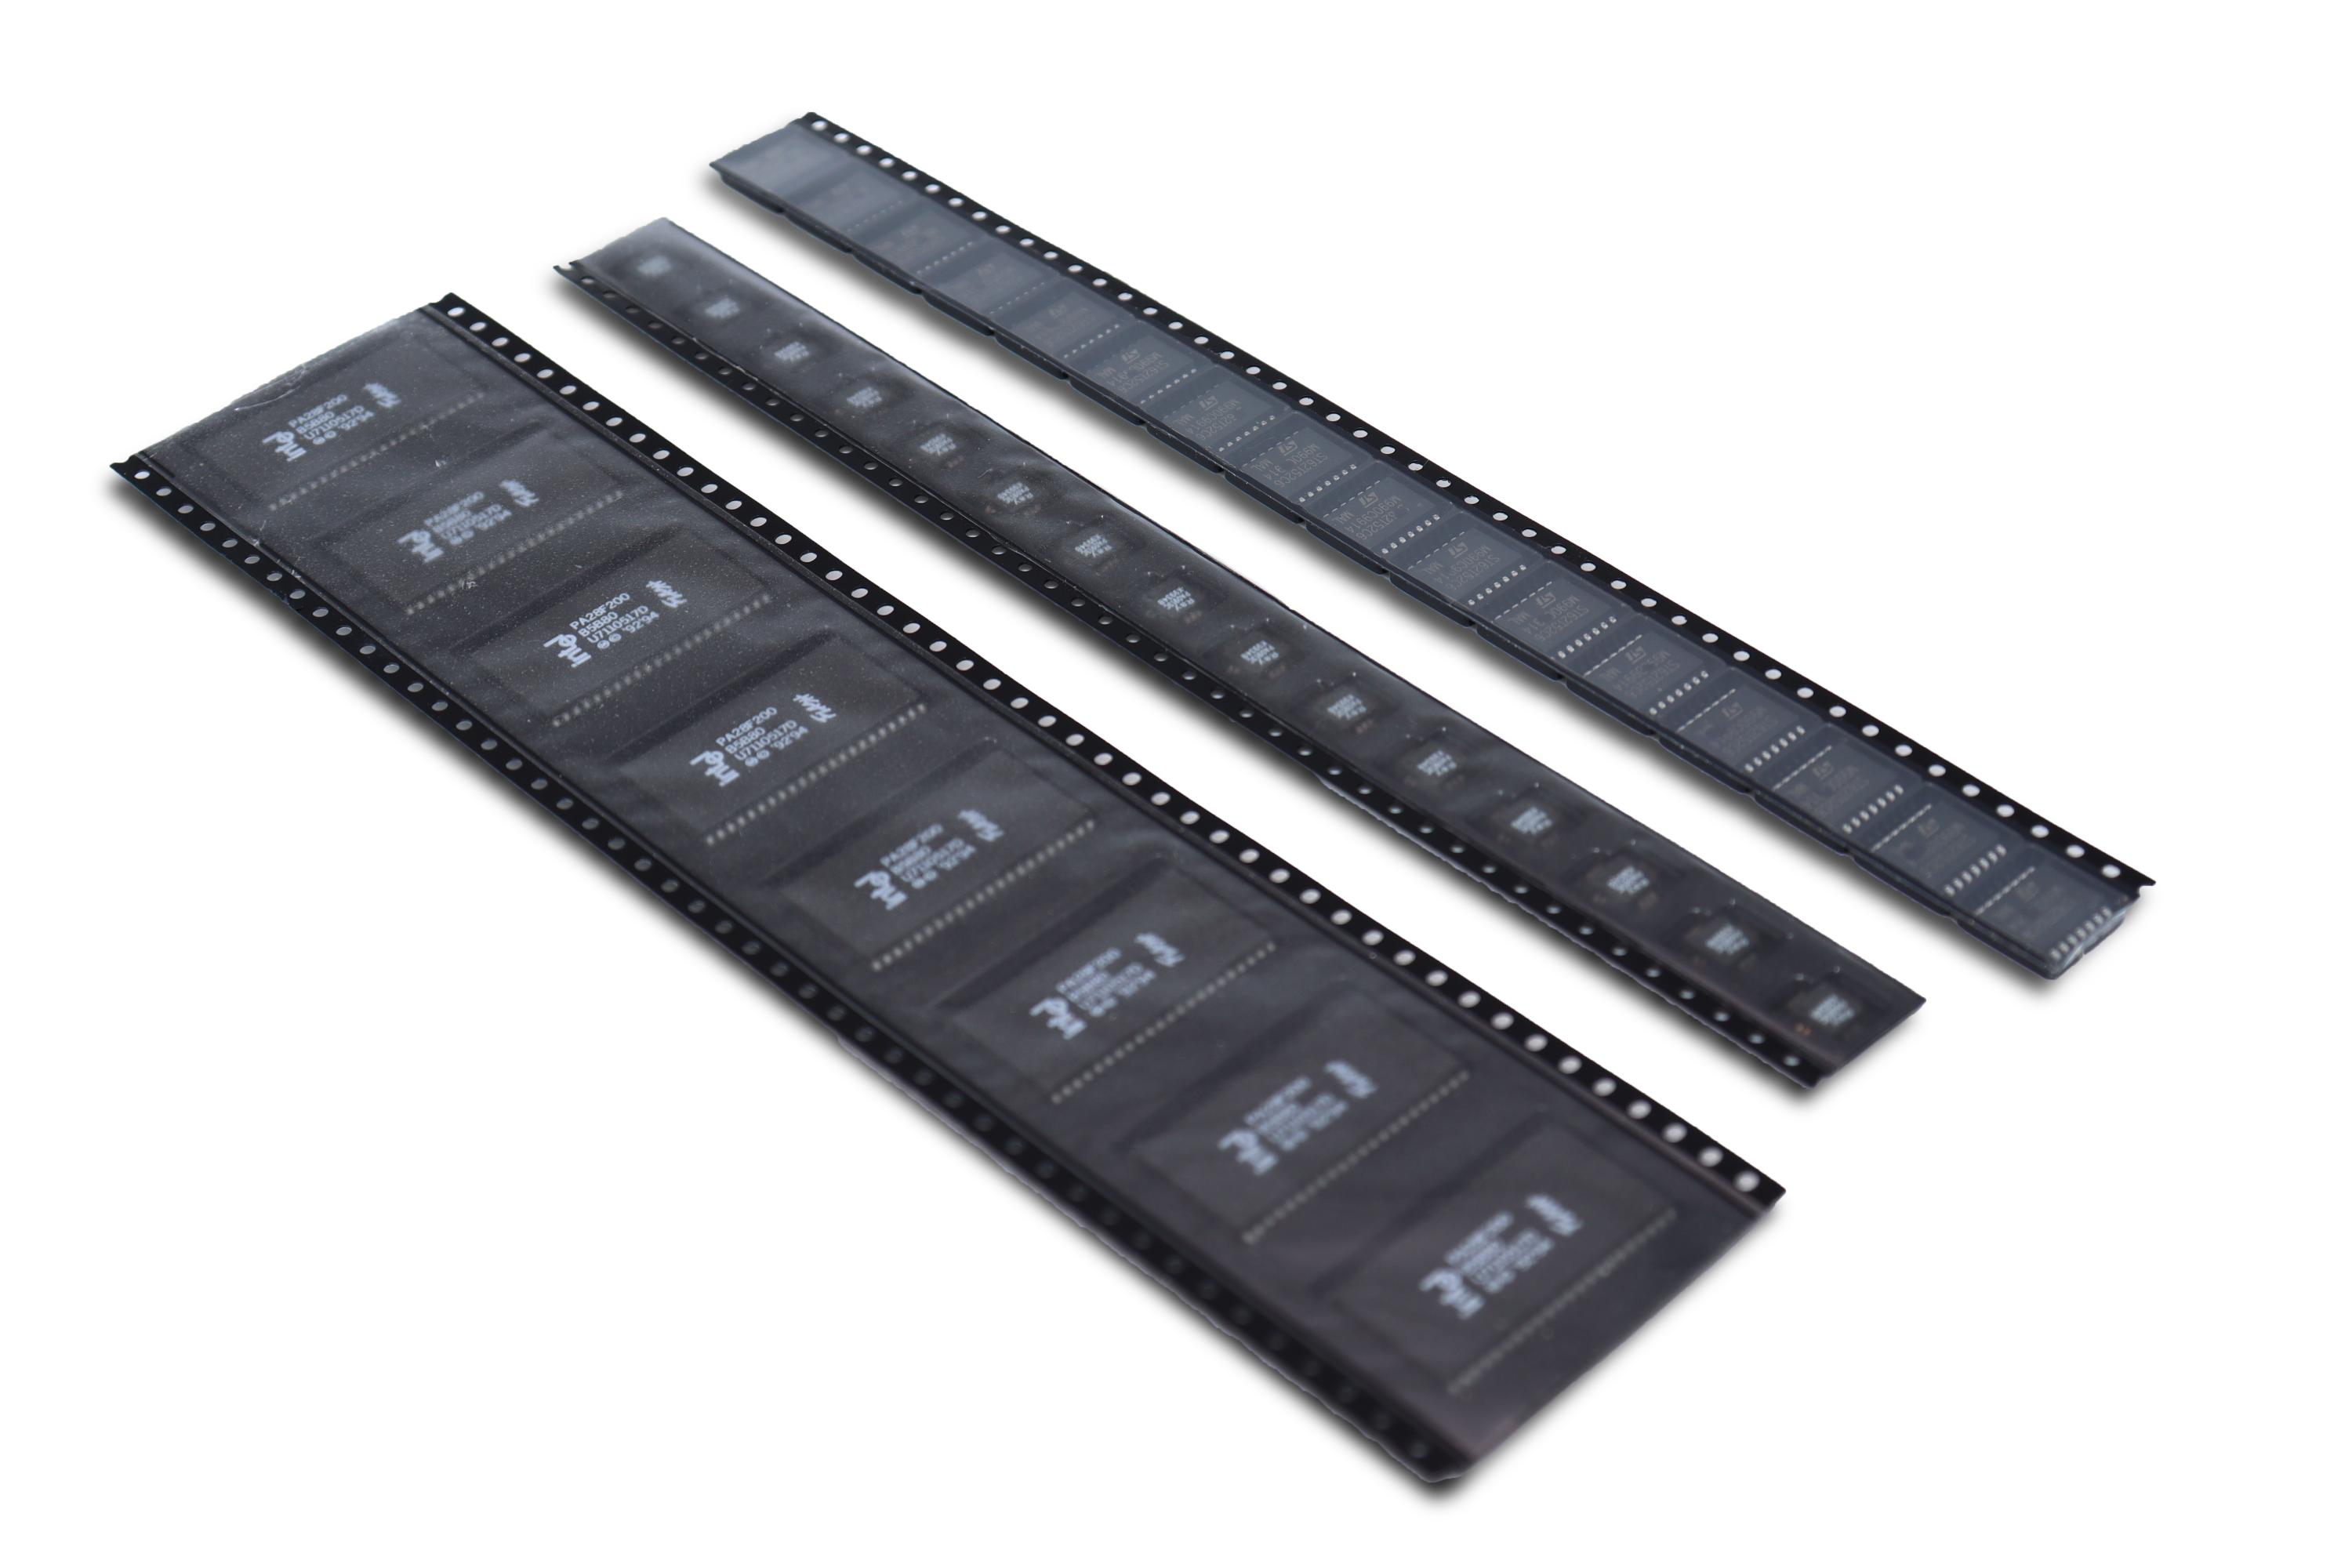 smd components in carrier tape